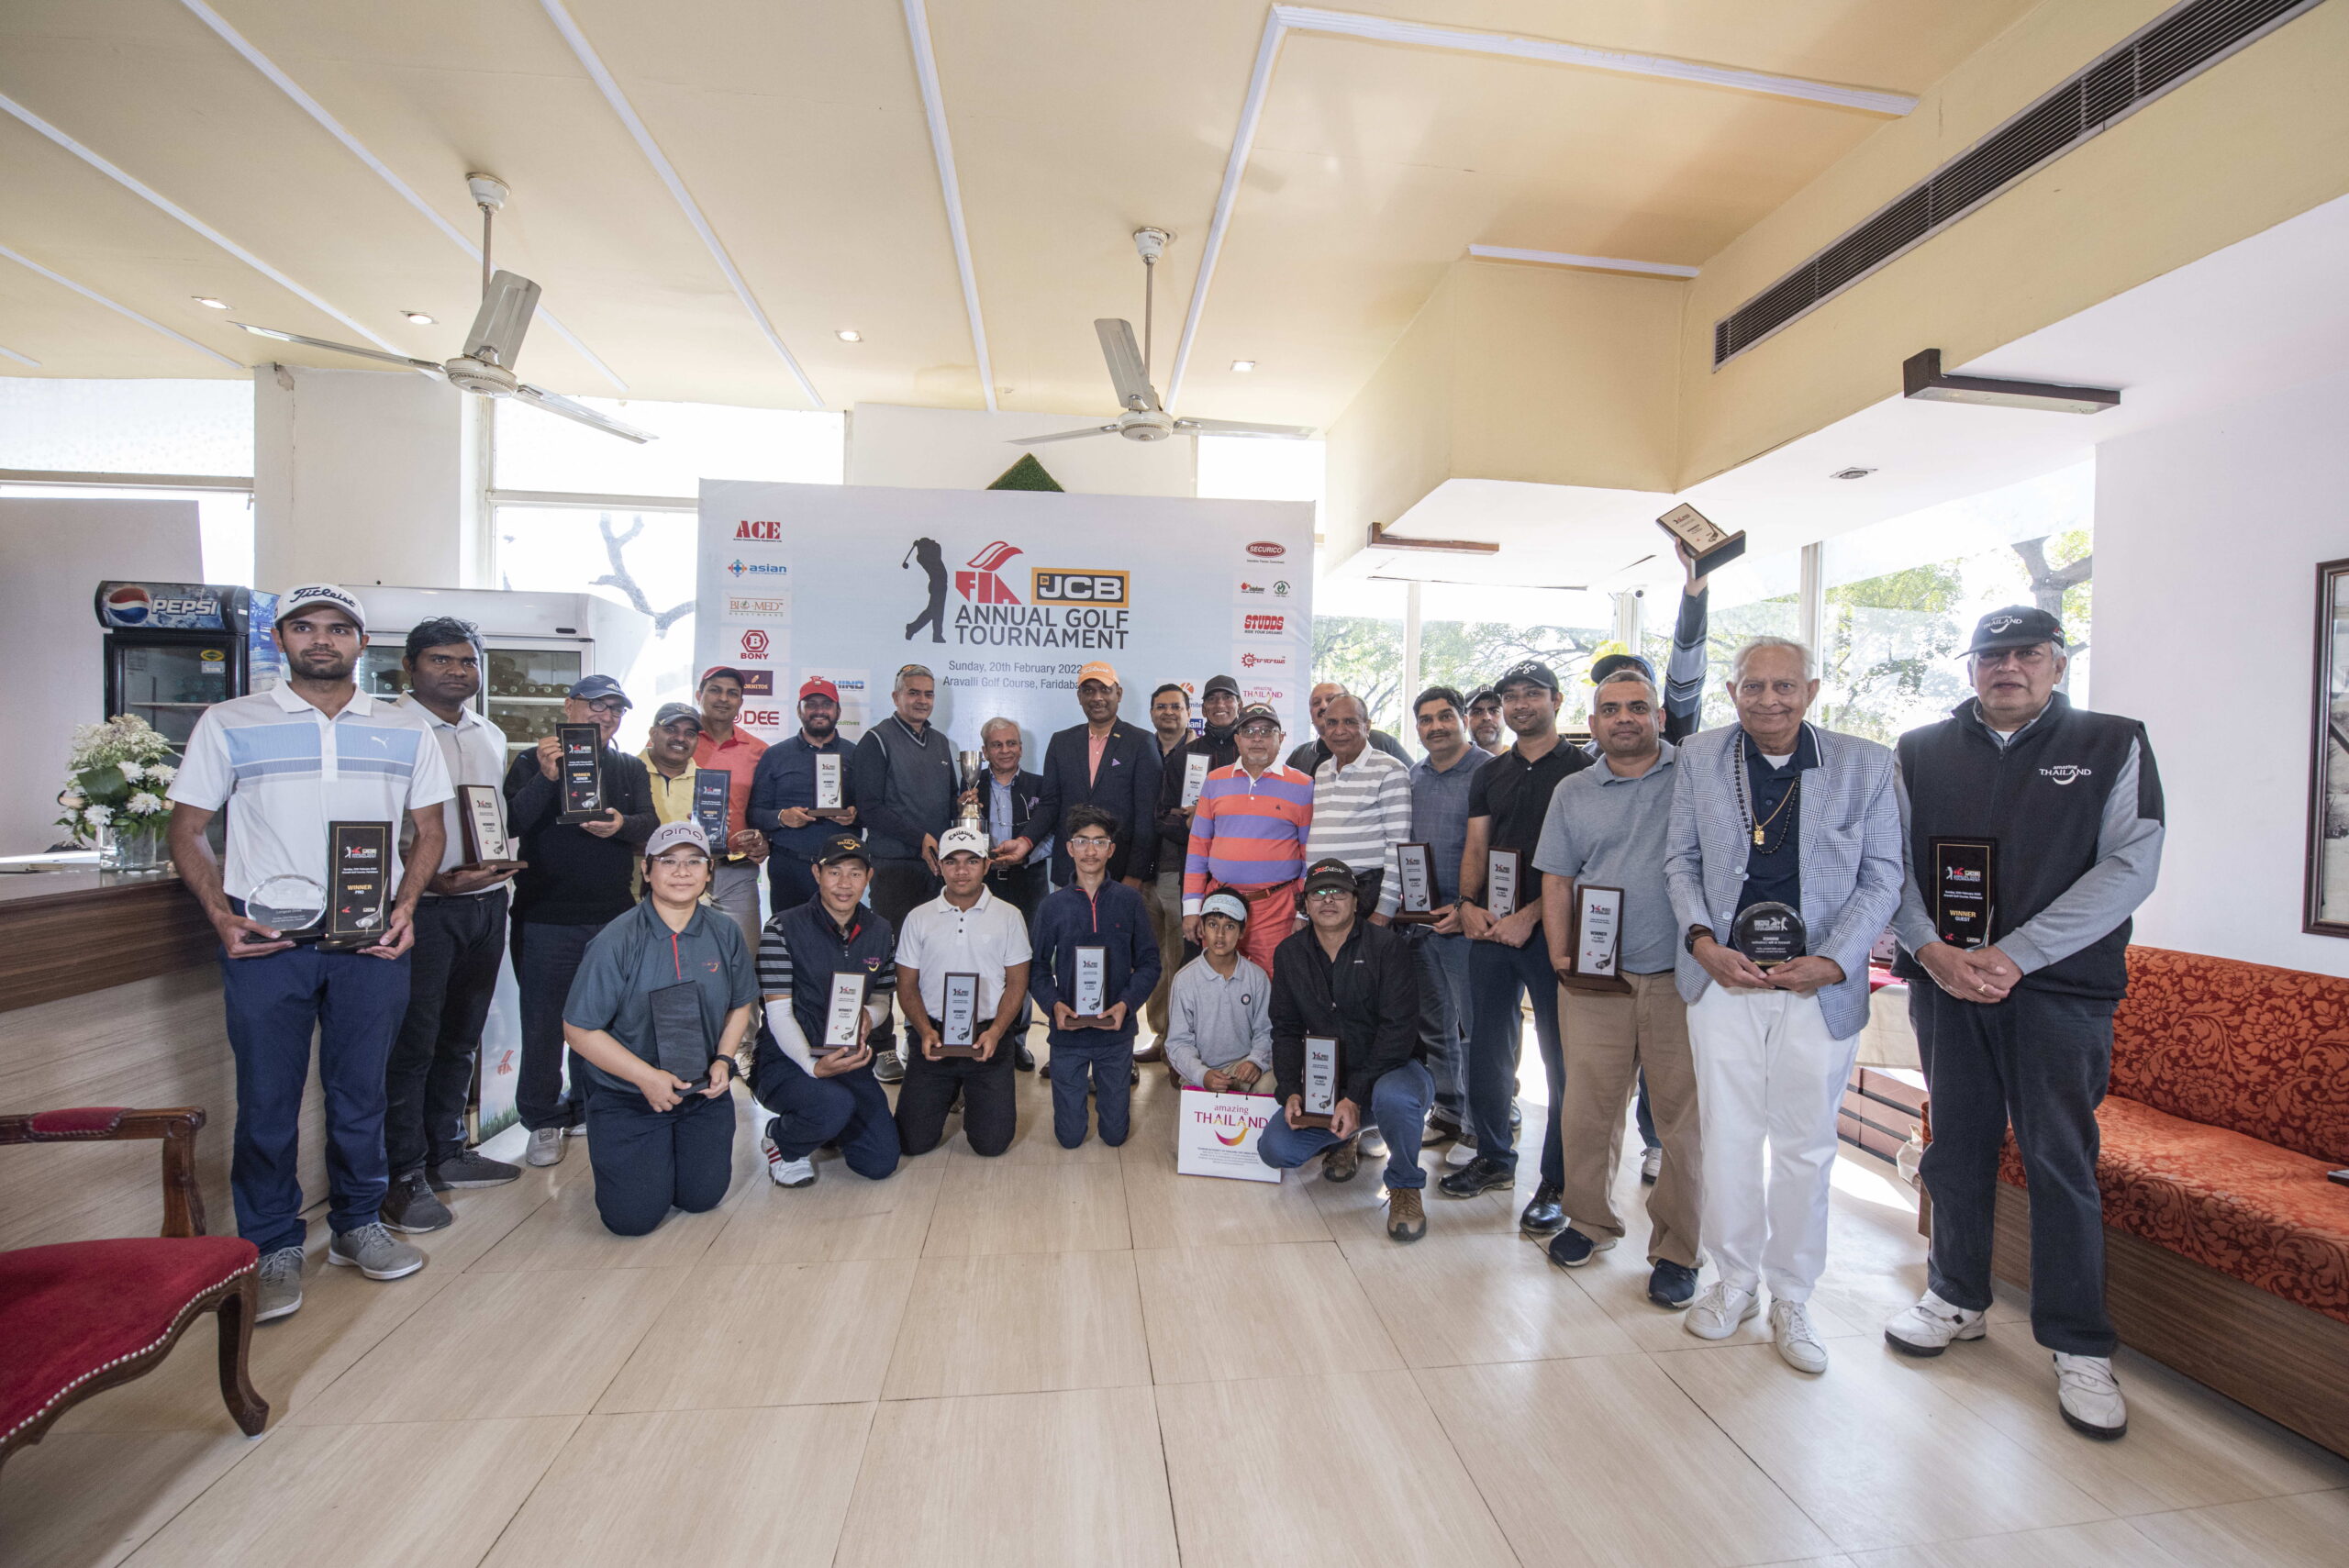 FIA-JCB Golf Tournament enters its 13th edition this year